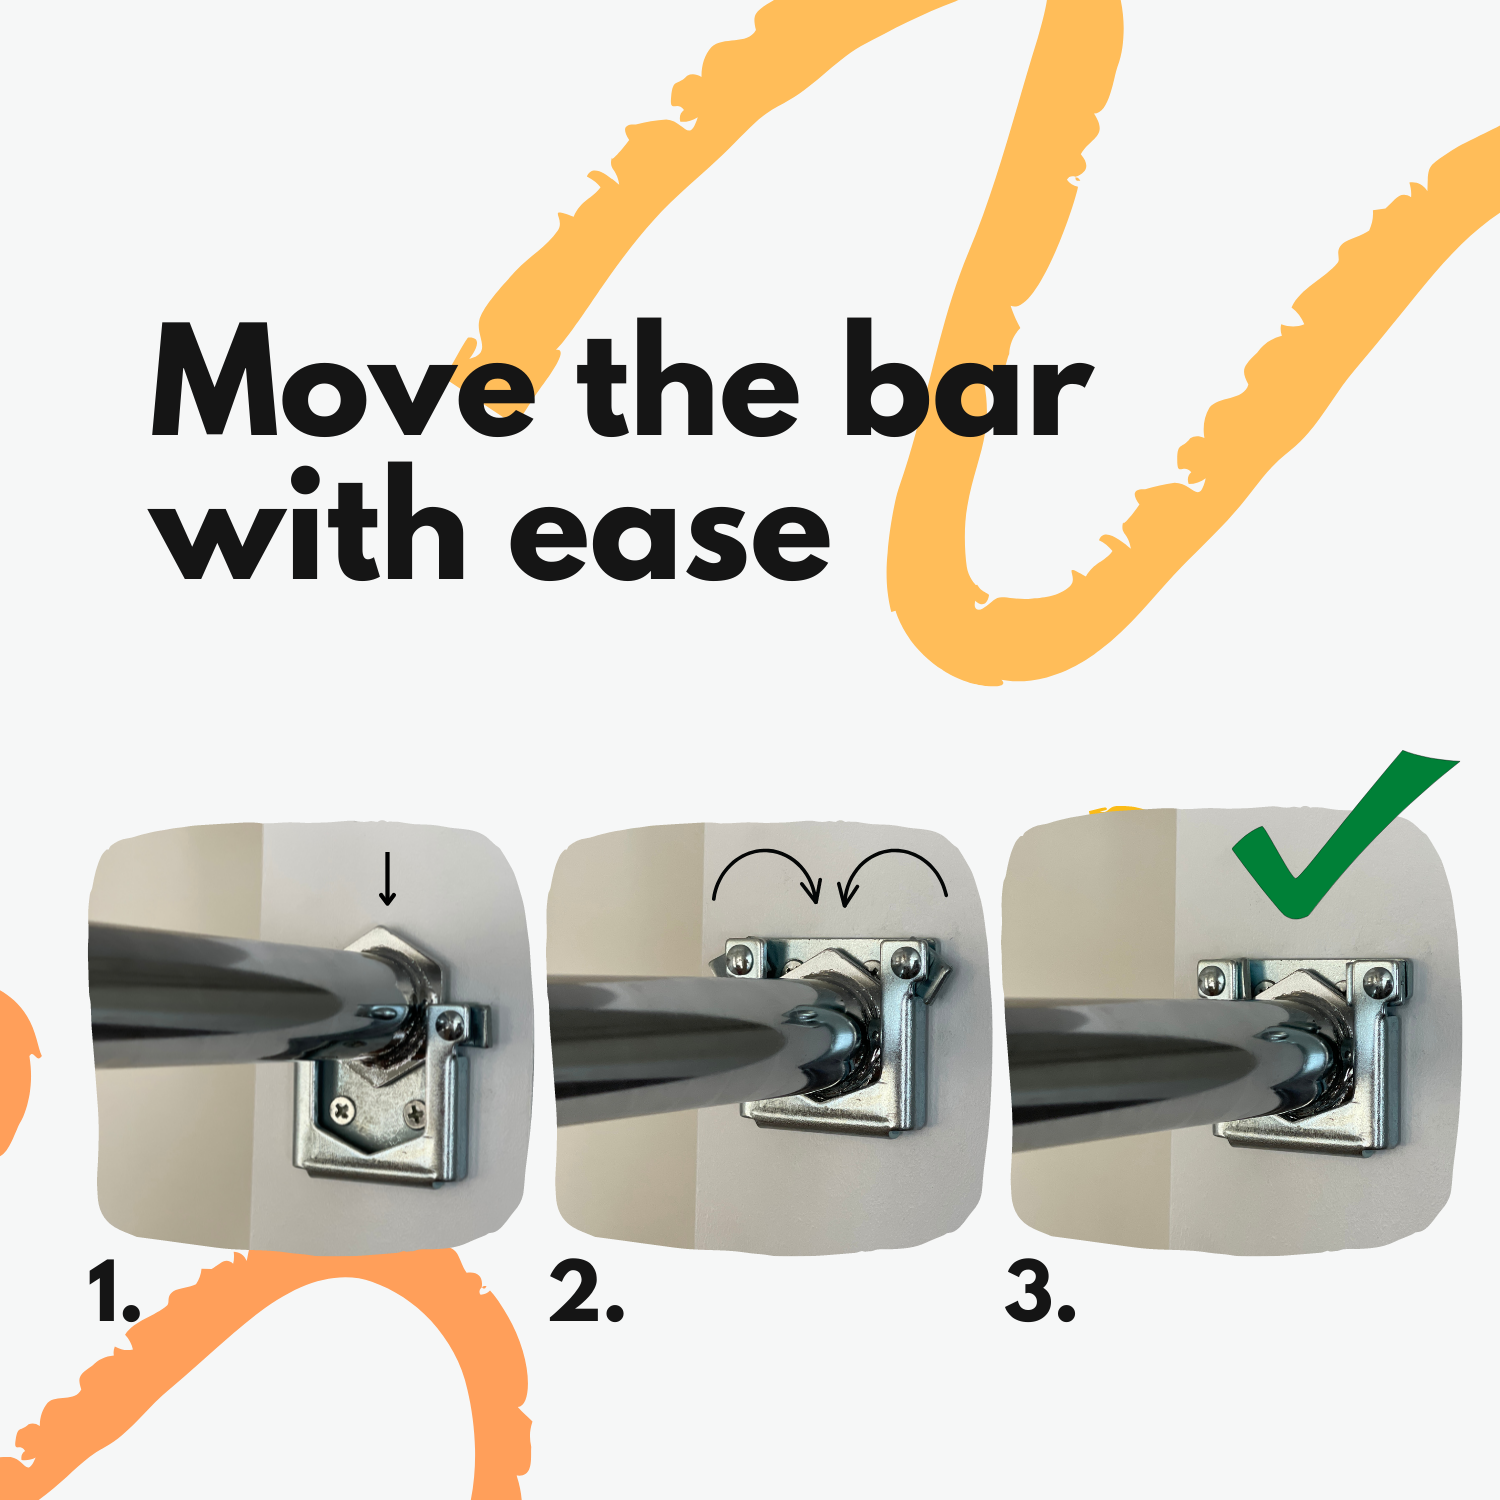 Brackets allow to move the pull-up bar with ease. 